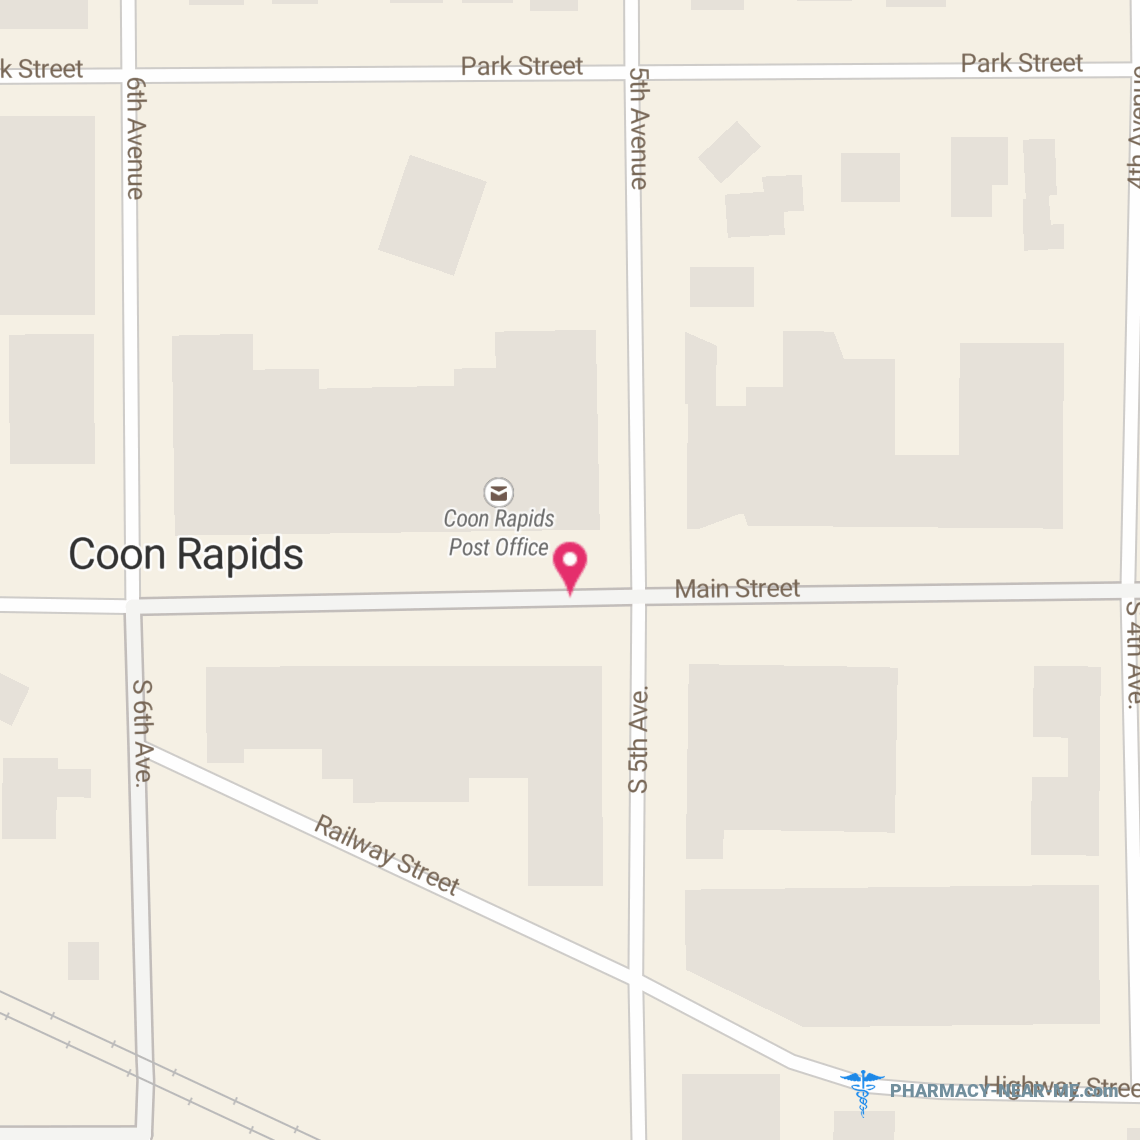 COON RAPIDS PHARMACY - Pharmacy Hours, Phone, Reviews & Information: 515 Main Street, Coon Rapids, Iowa 50058, United States